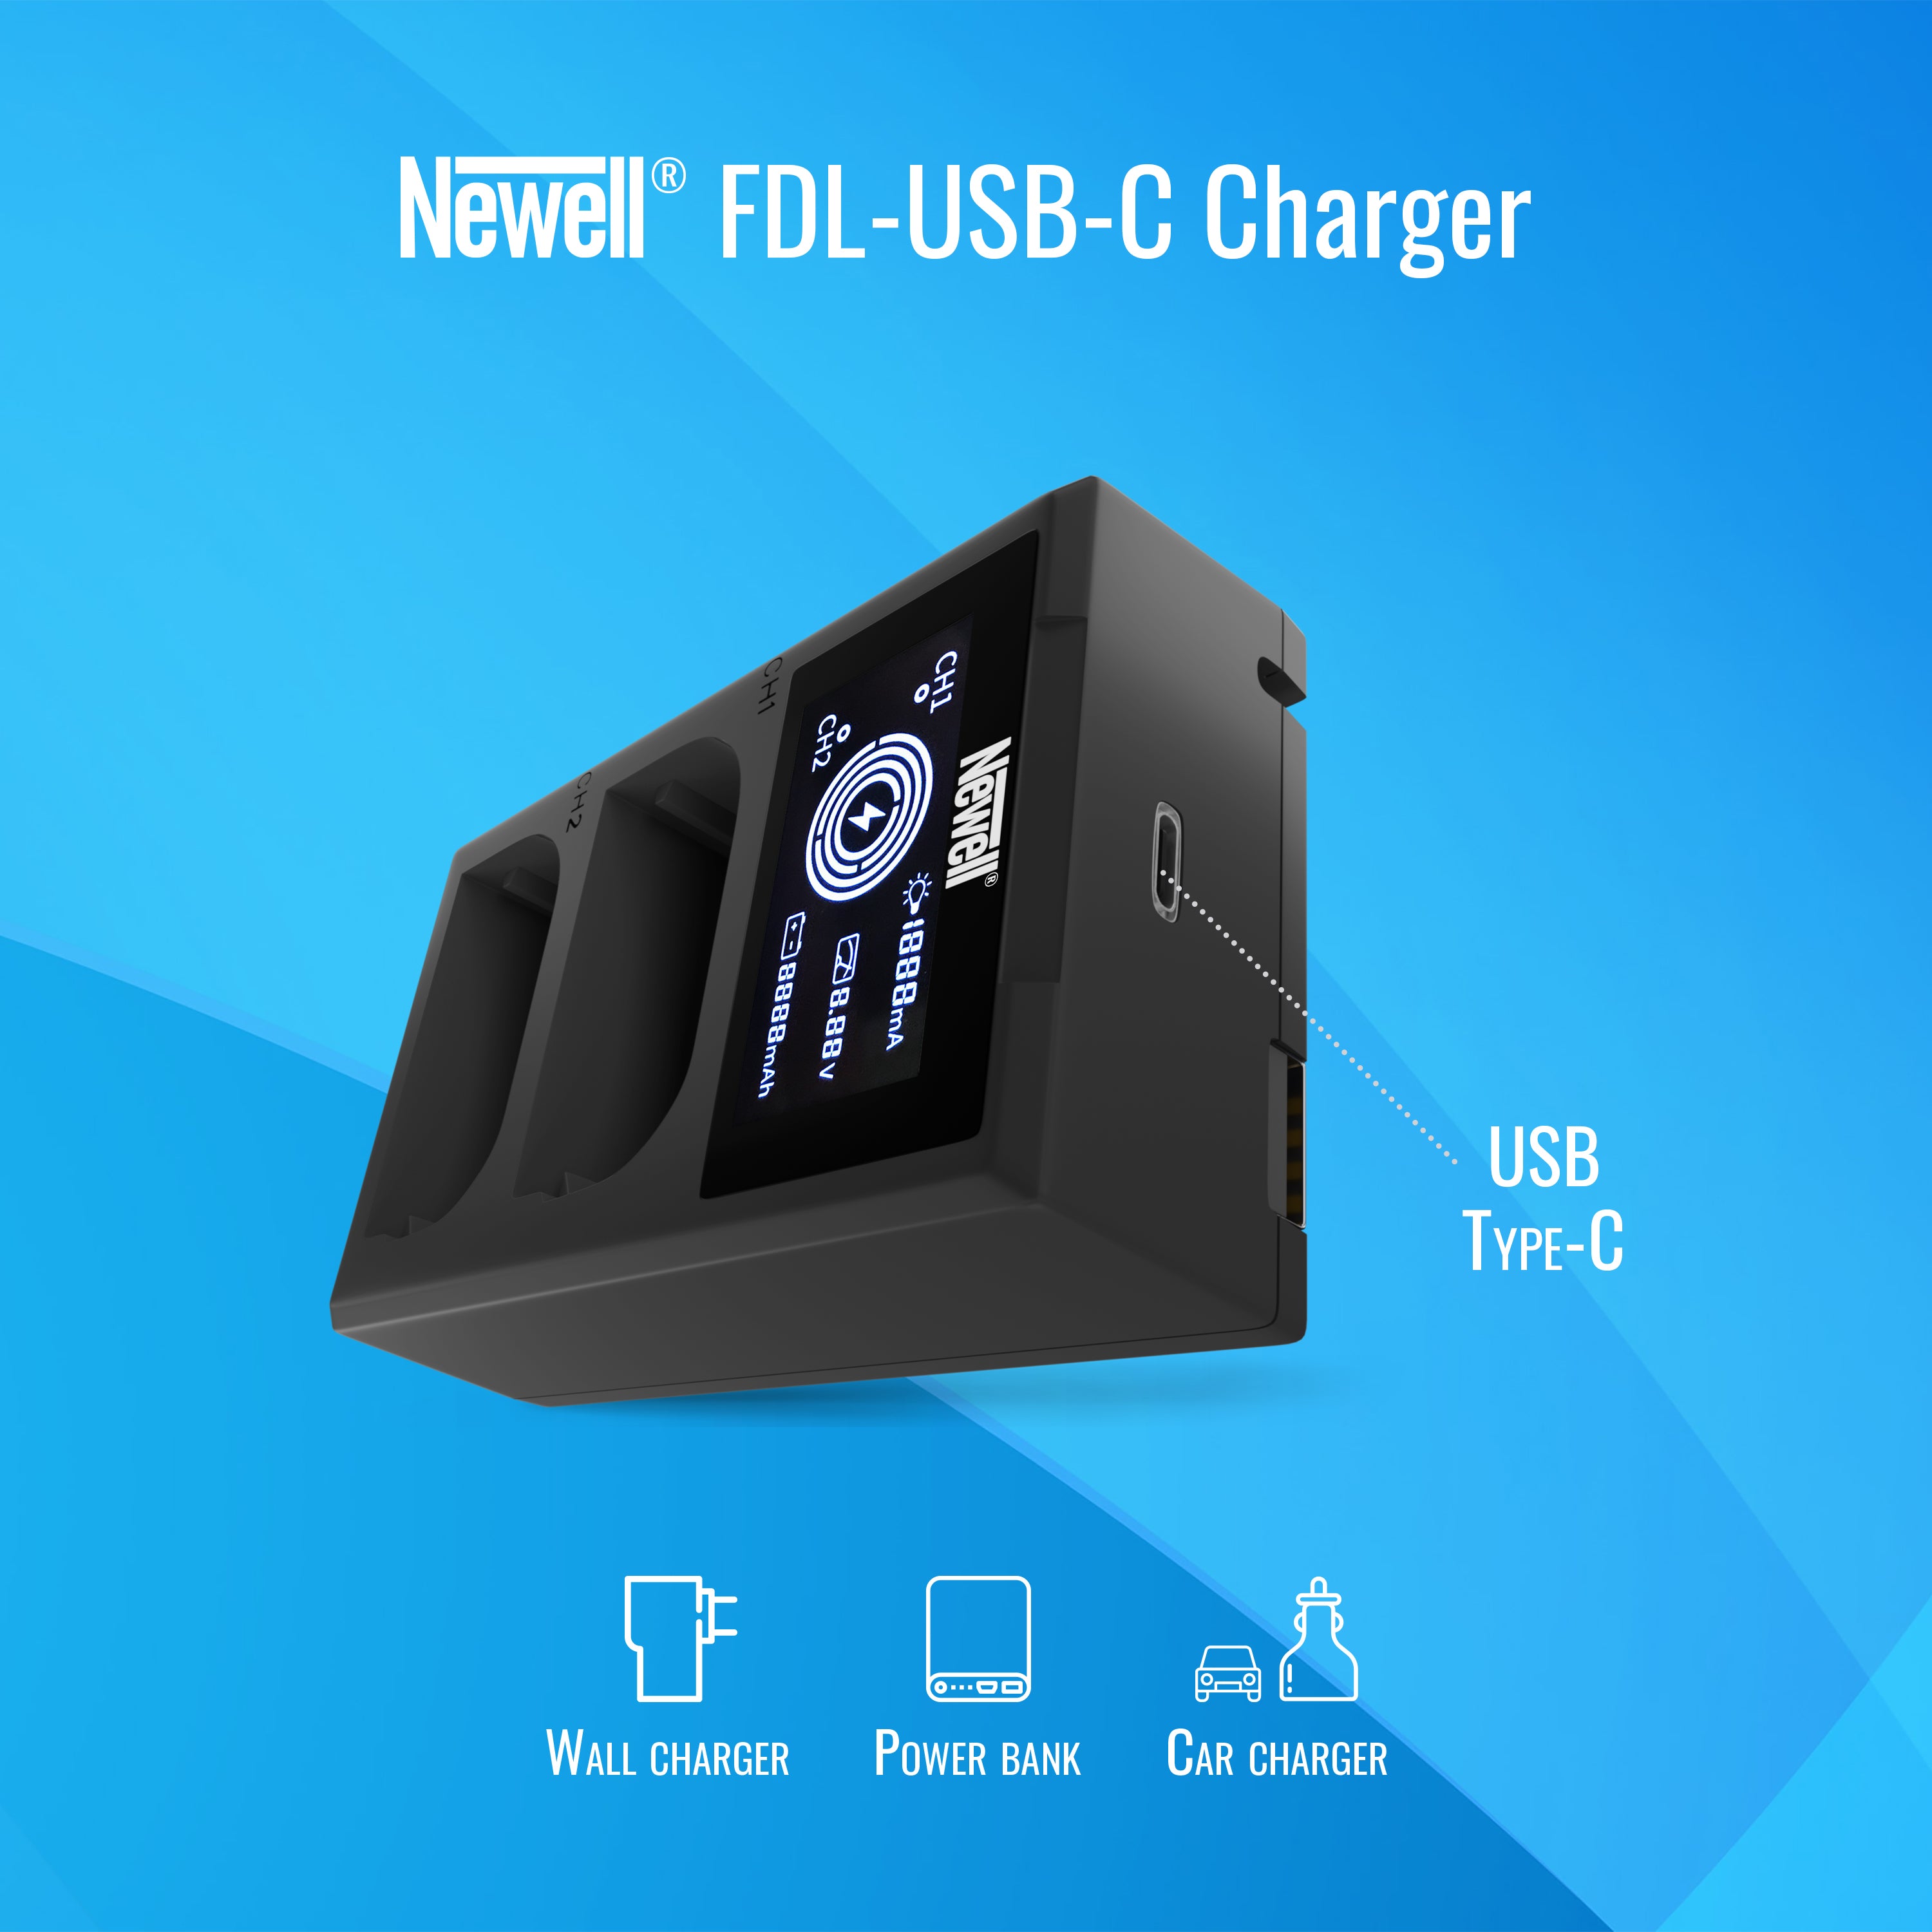 Newell FDL-USB-C dual channel battery charger for NP-FW50 batteries